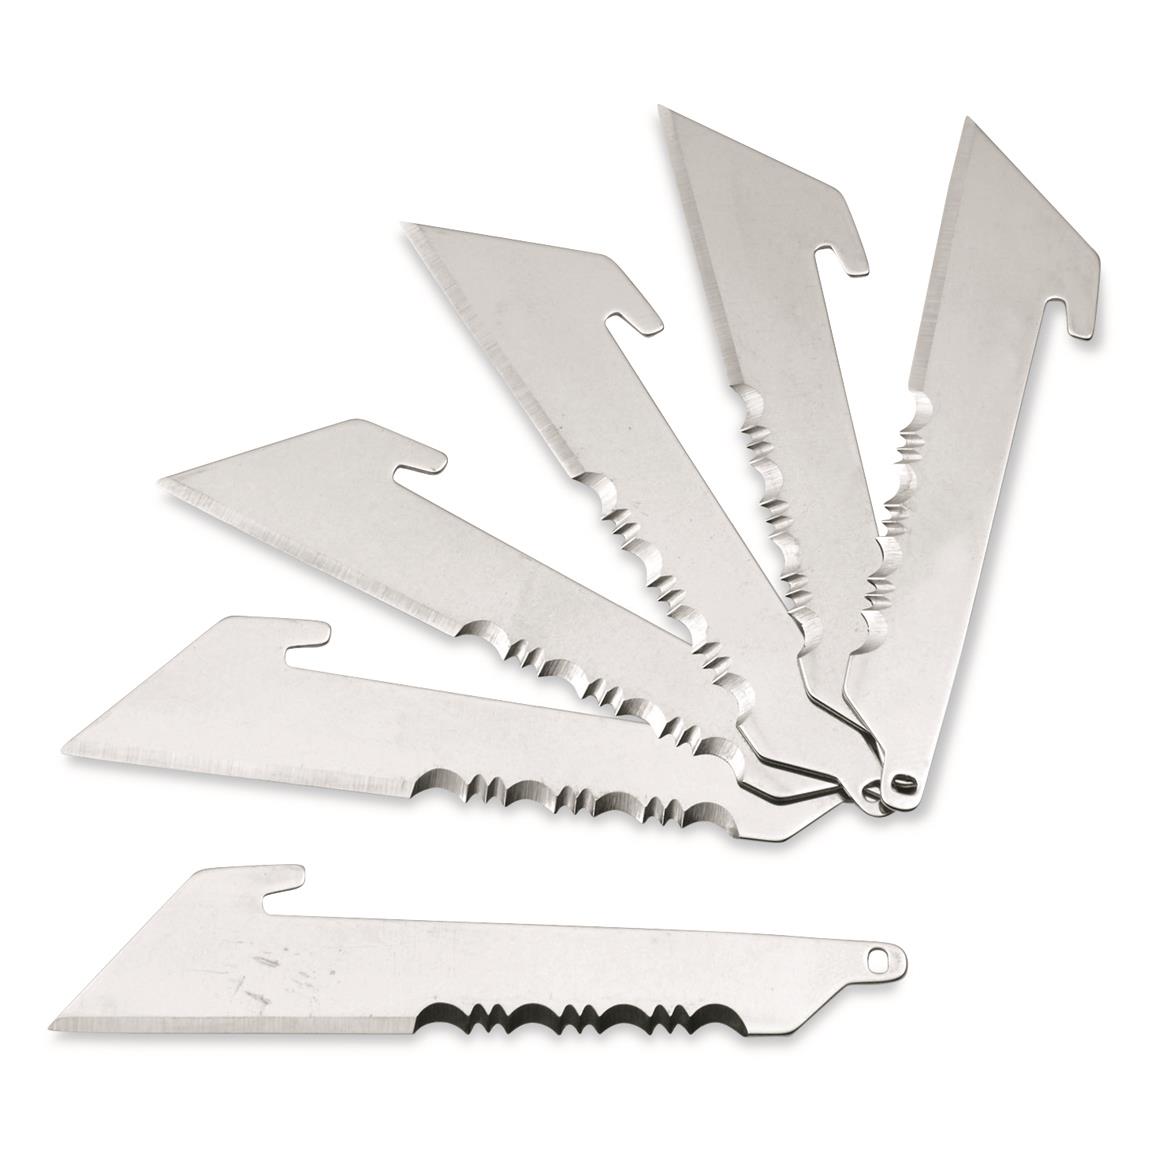 Outdoor Edge 2.5" 50% Serrated Utility Blade Pack, Stainless, 6 Pack